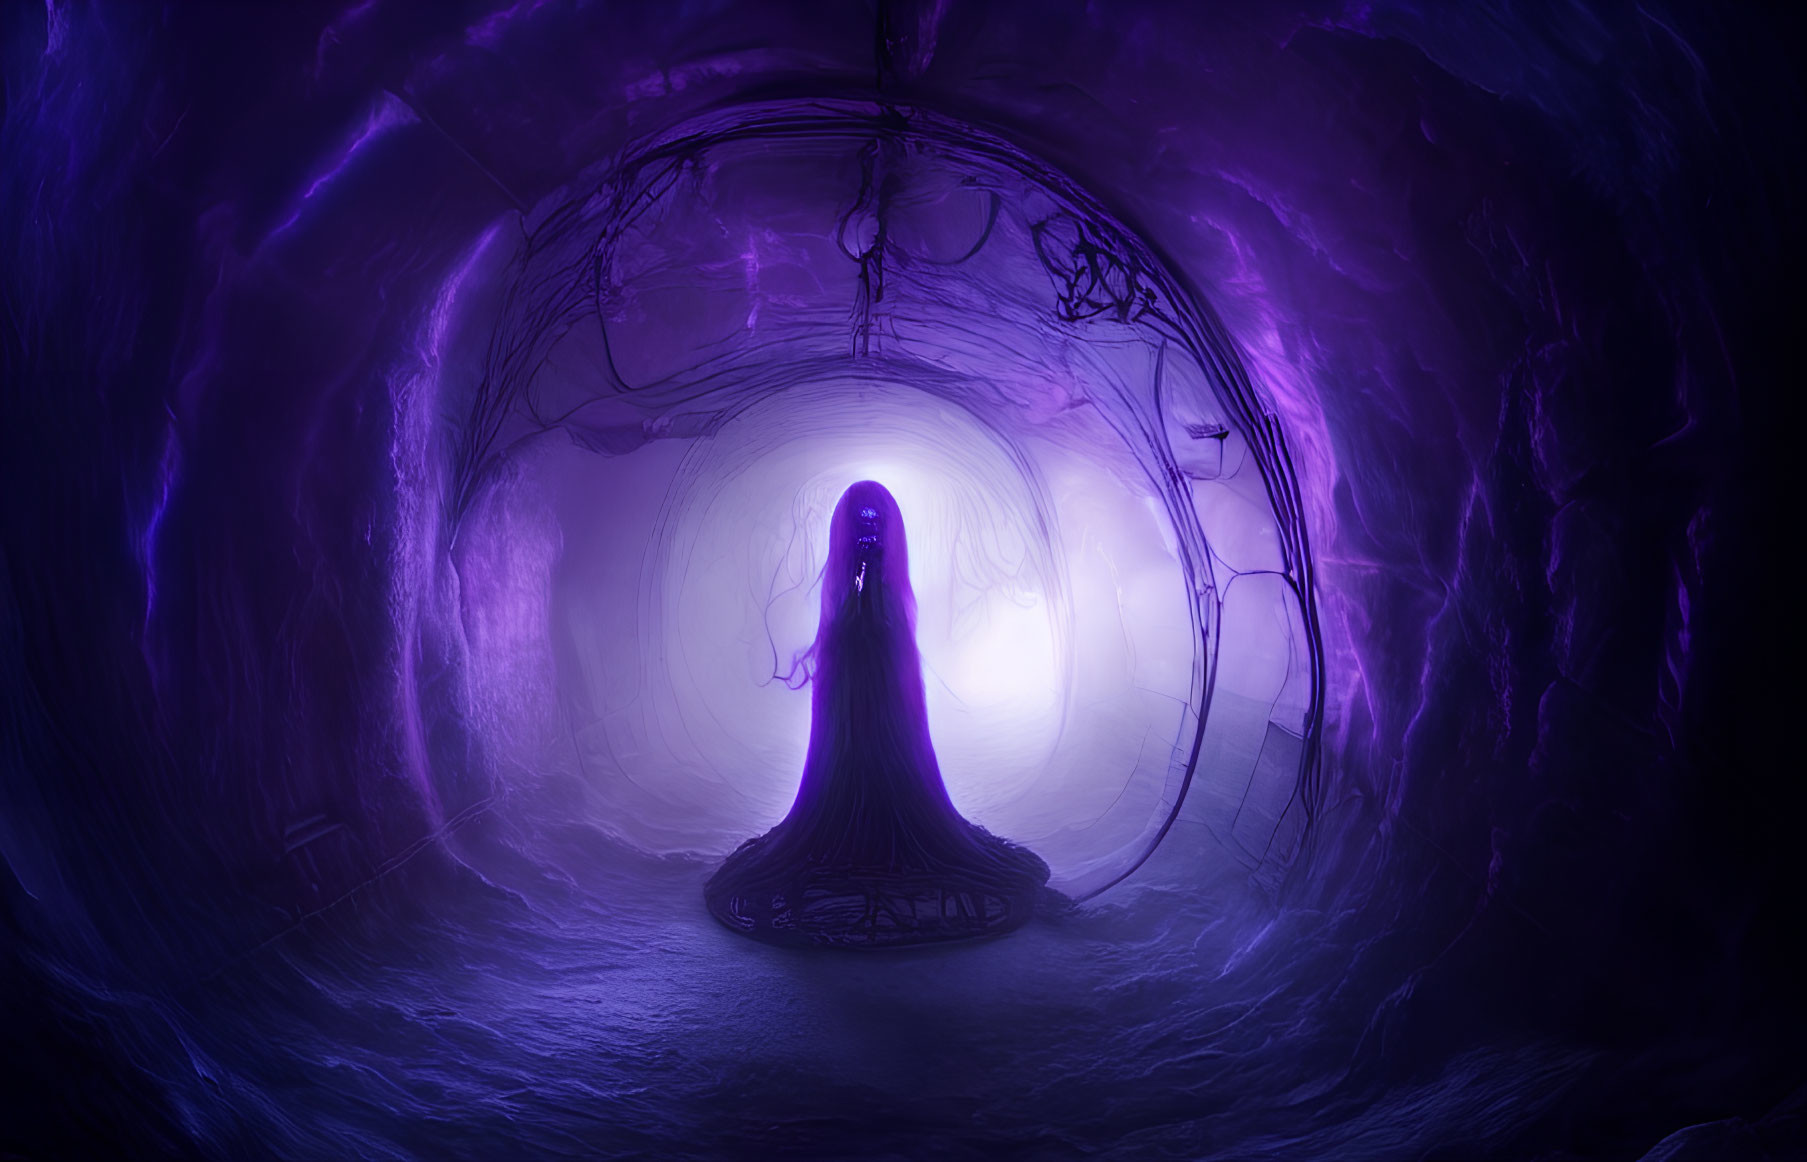 Mystical figure in cloak at center of glowing purple tunnel